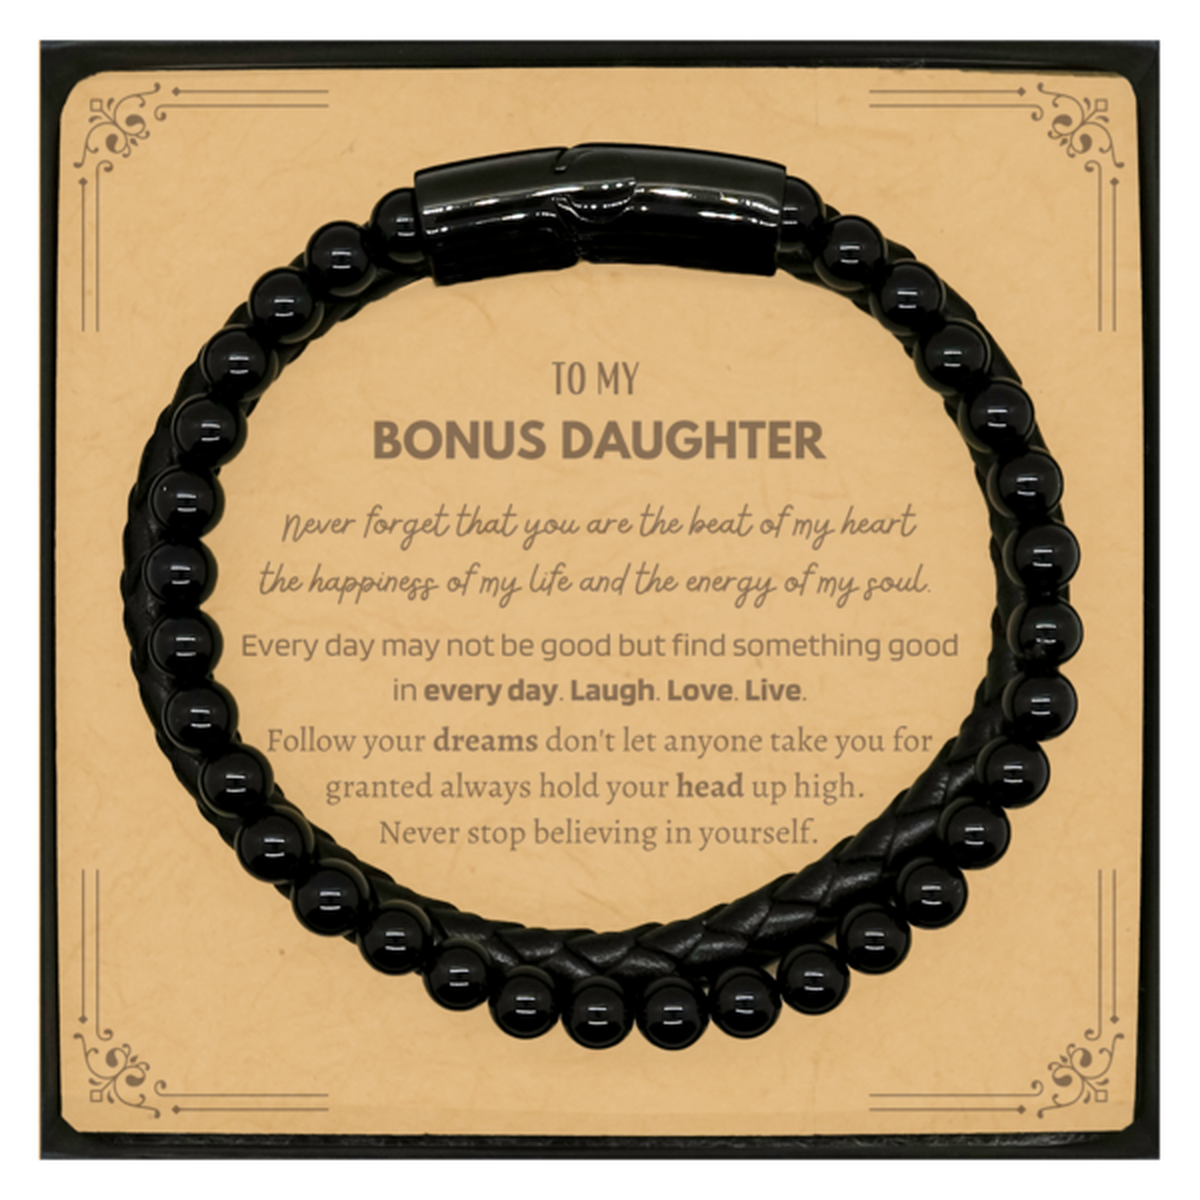 To My Bonus Daughter Message Card Gifts, Christmas Bonus Daughter Stone Leather Bracelets Present, Birthday Unique Motivational For Bonus Daughter, To My Bonus Daughter Never forget that you are the beat of my heart the happiness of my life and the energy